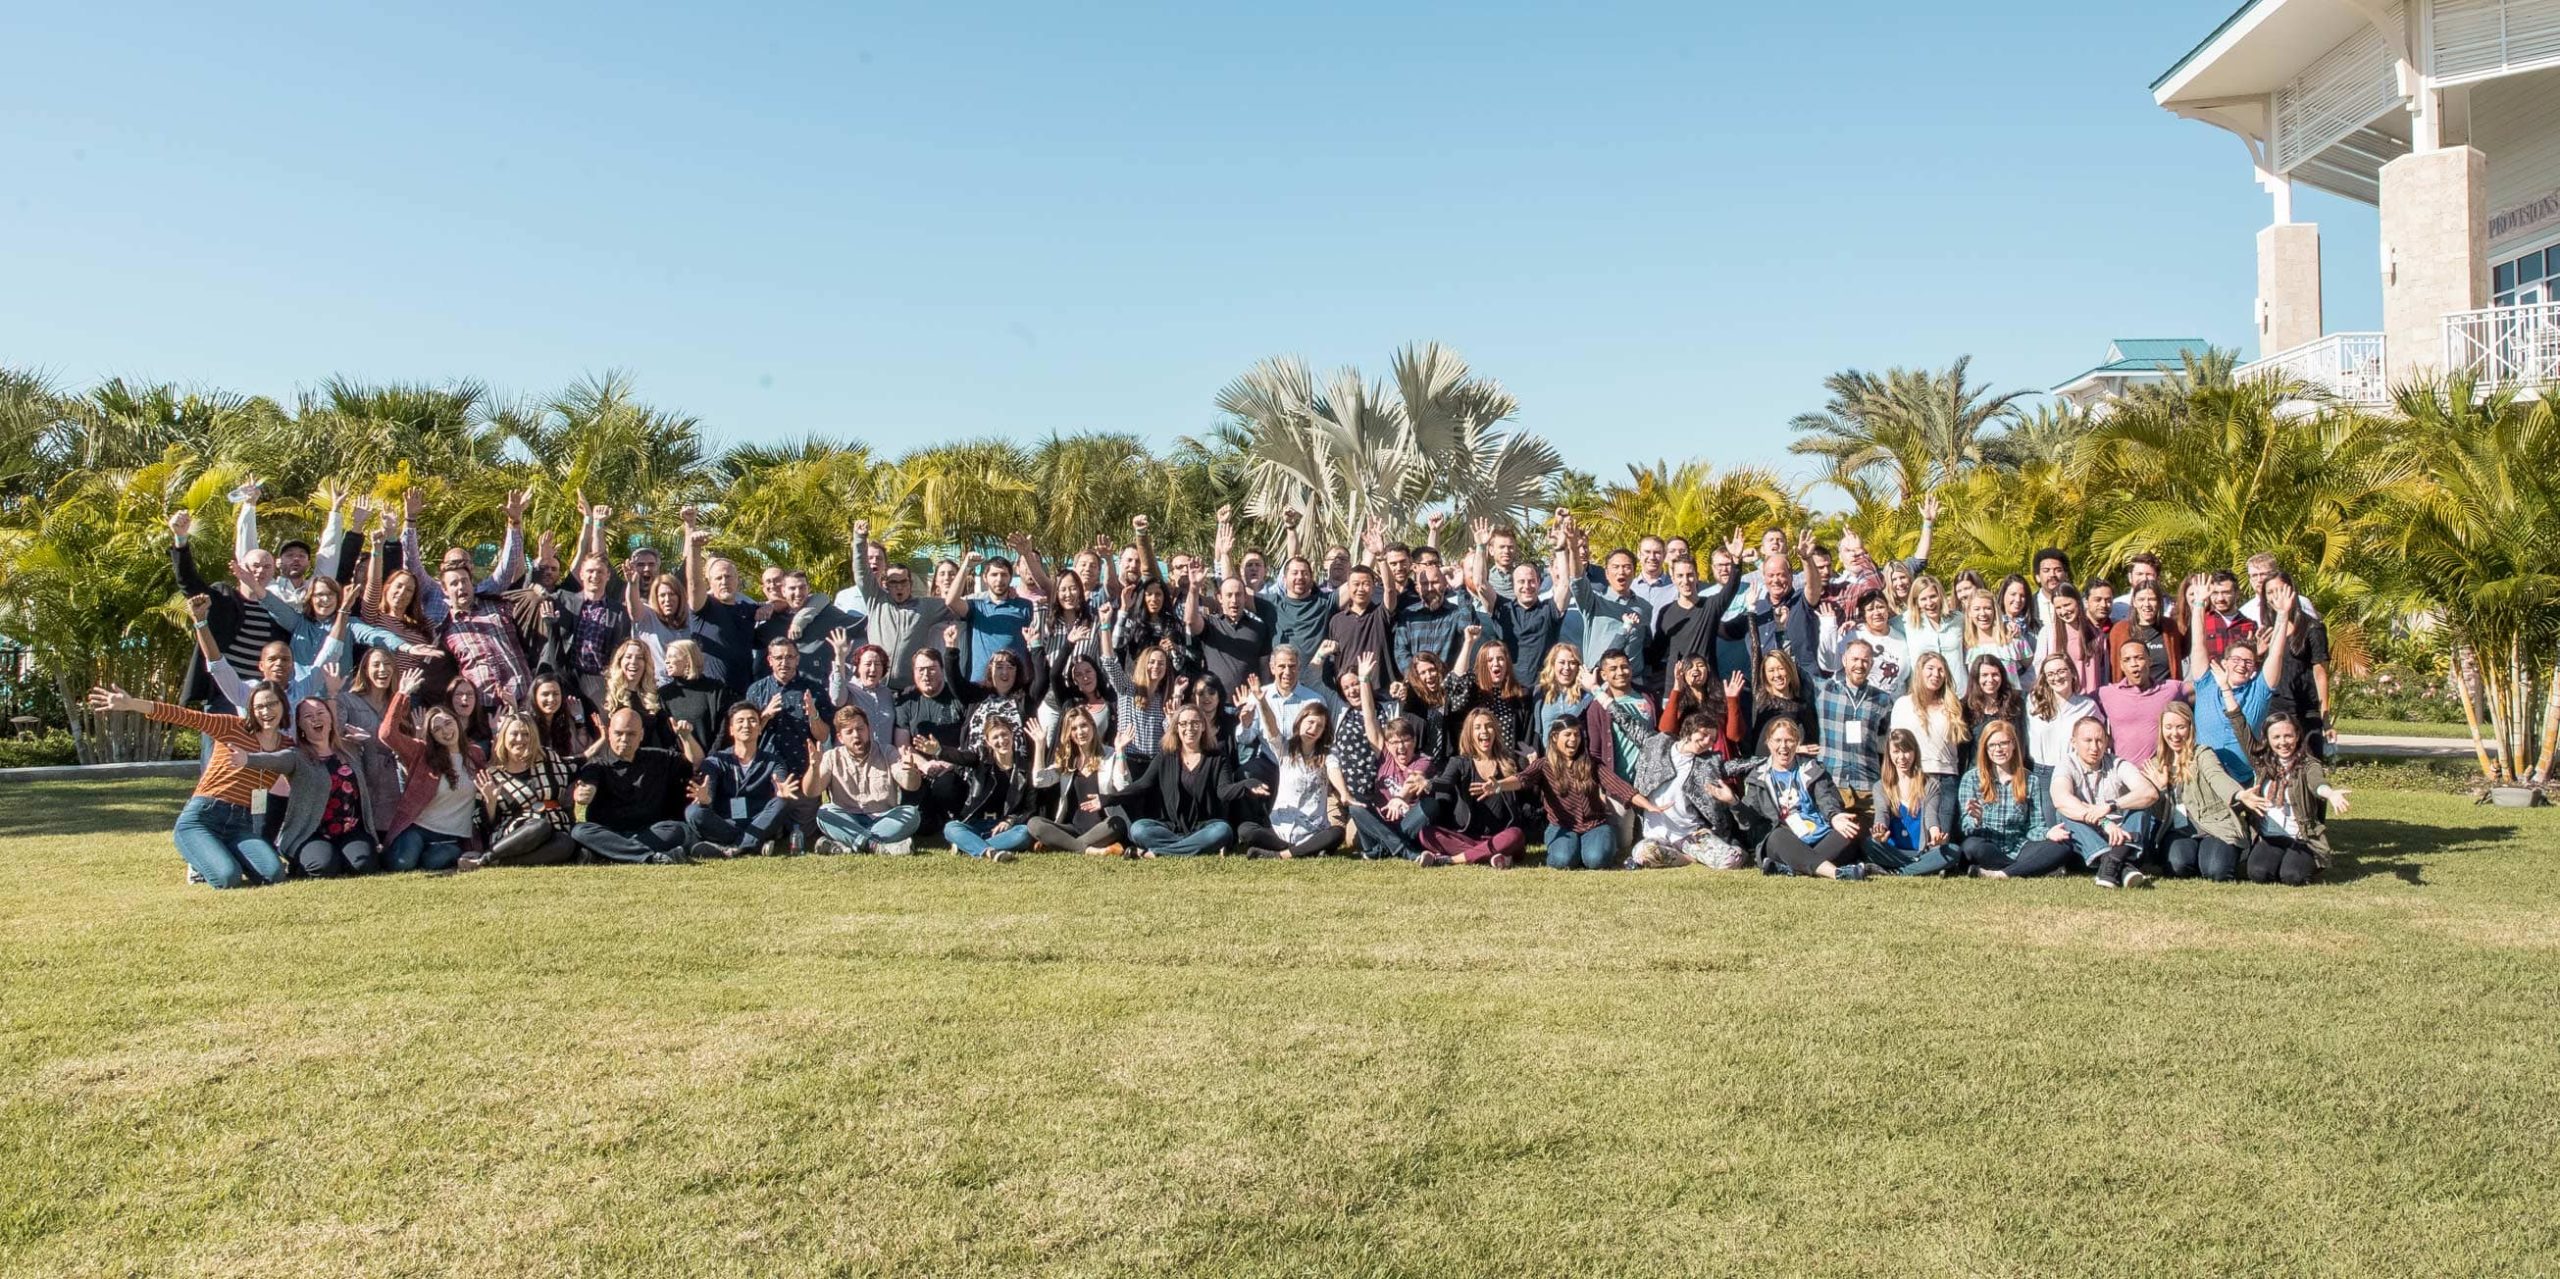 team photo of AdThrive employees outside on a grassy field